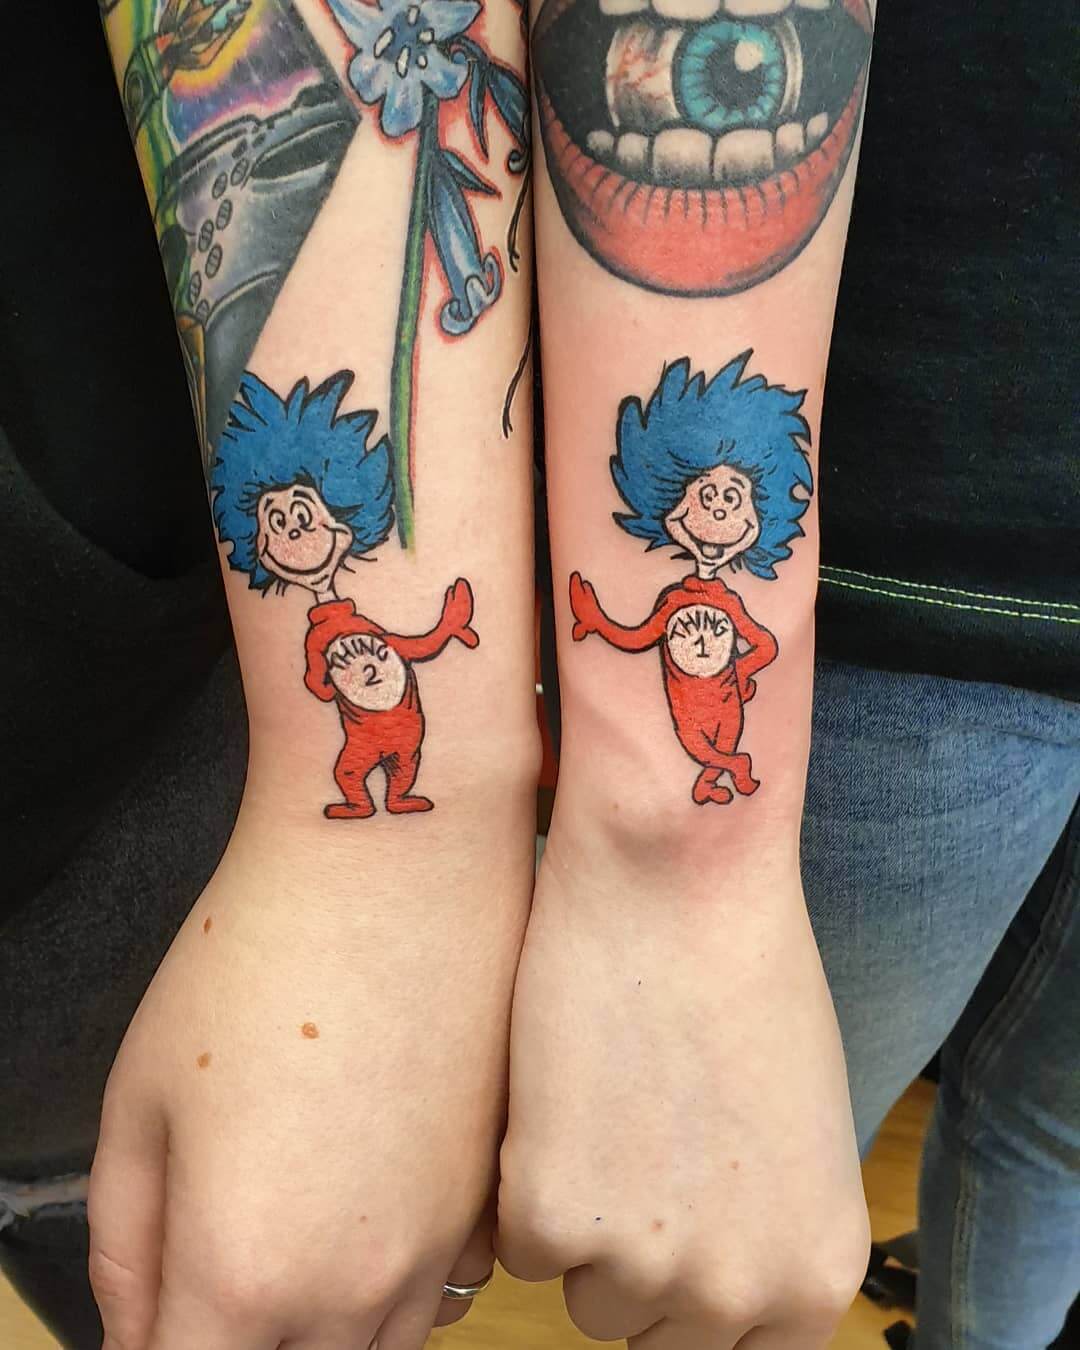 Thing One and Thing Two tattoo